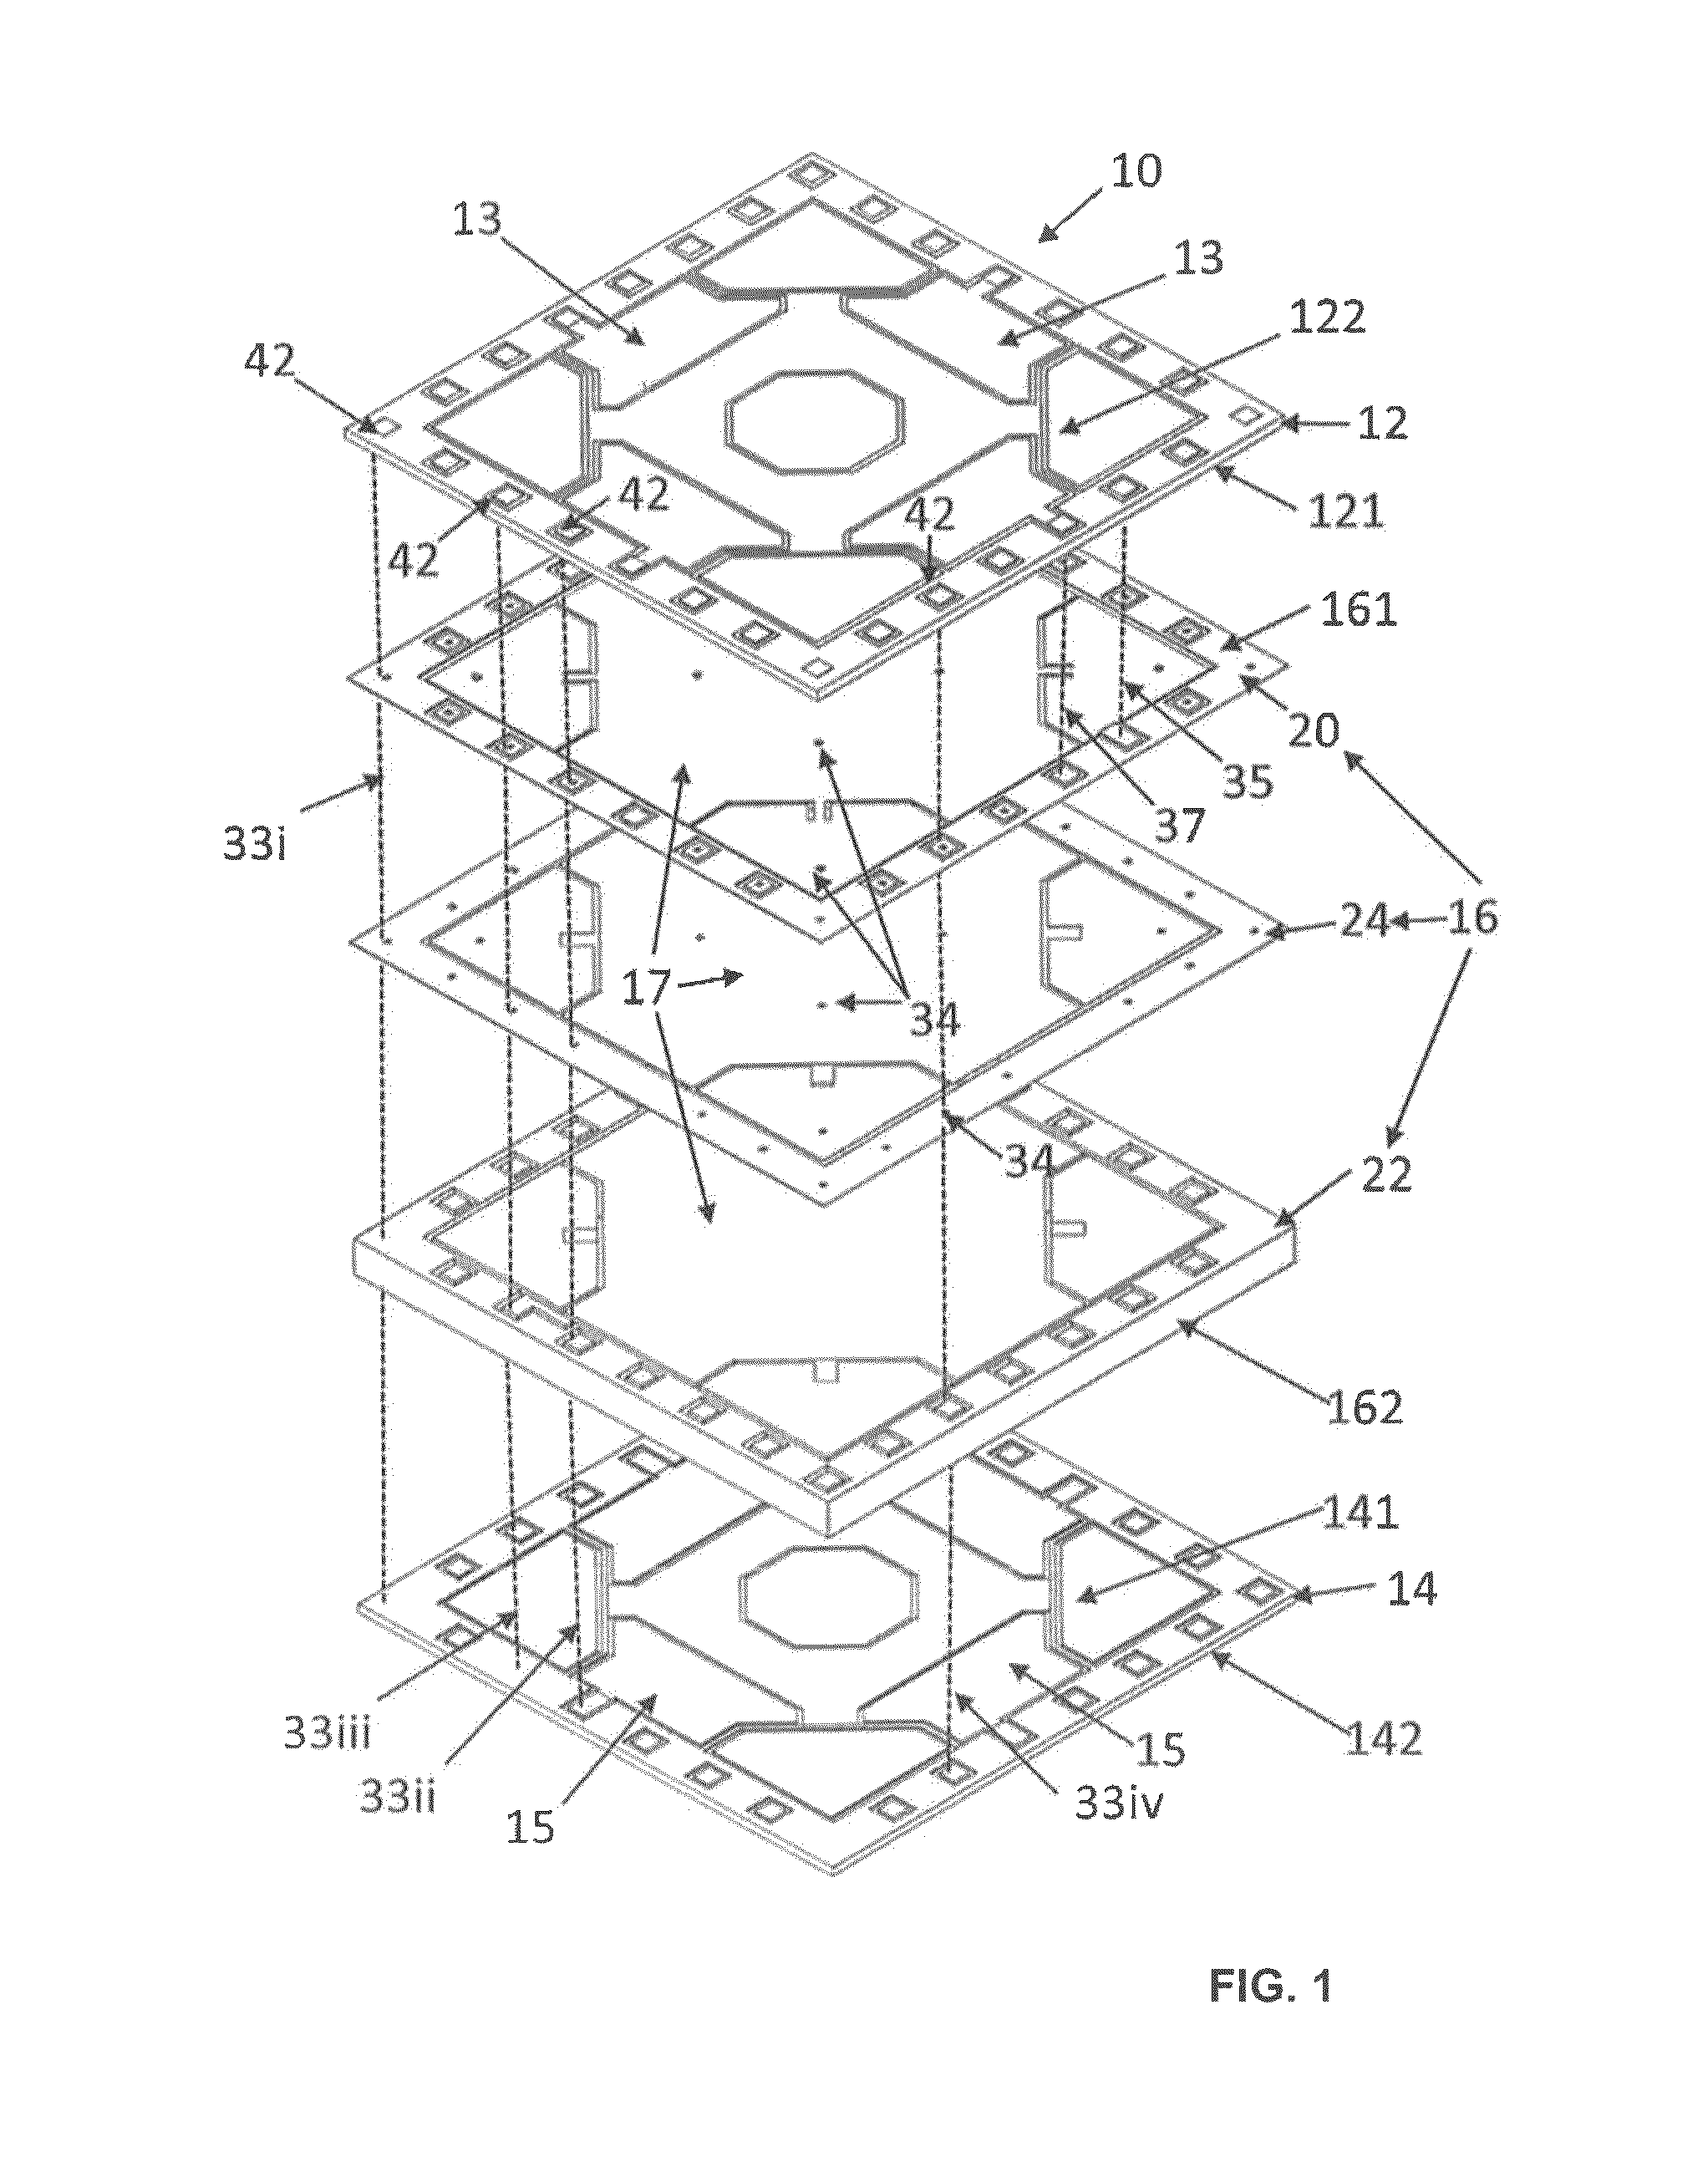 3D MEMS device and method of manufacturing